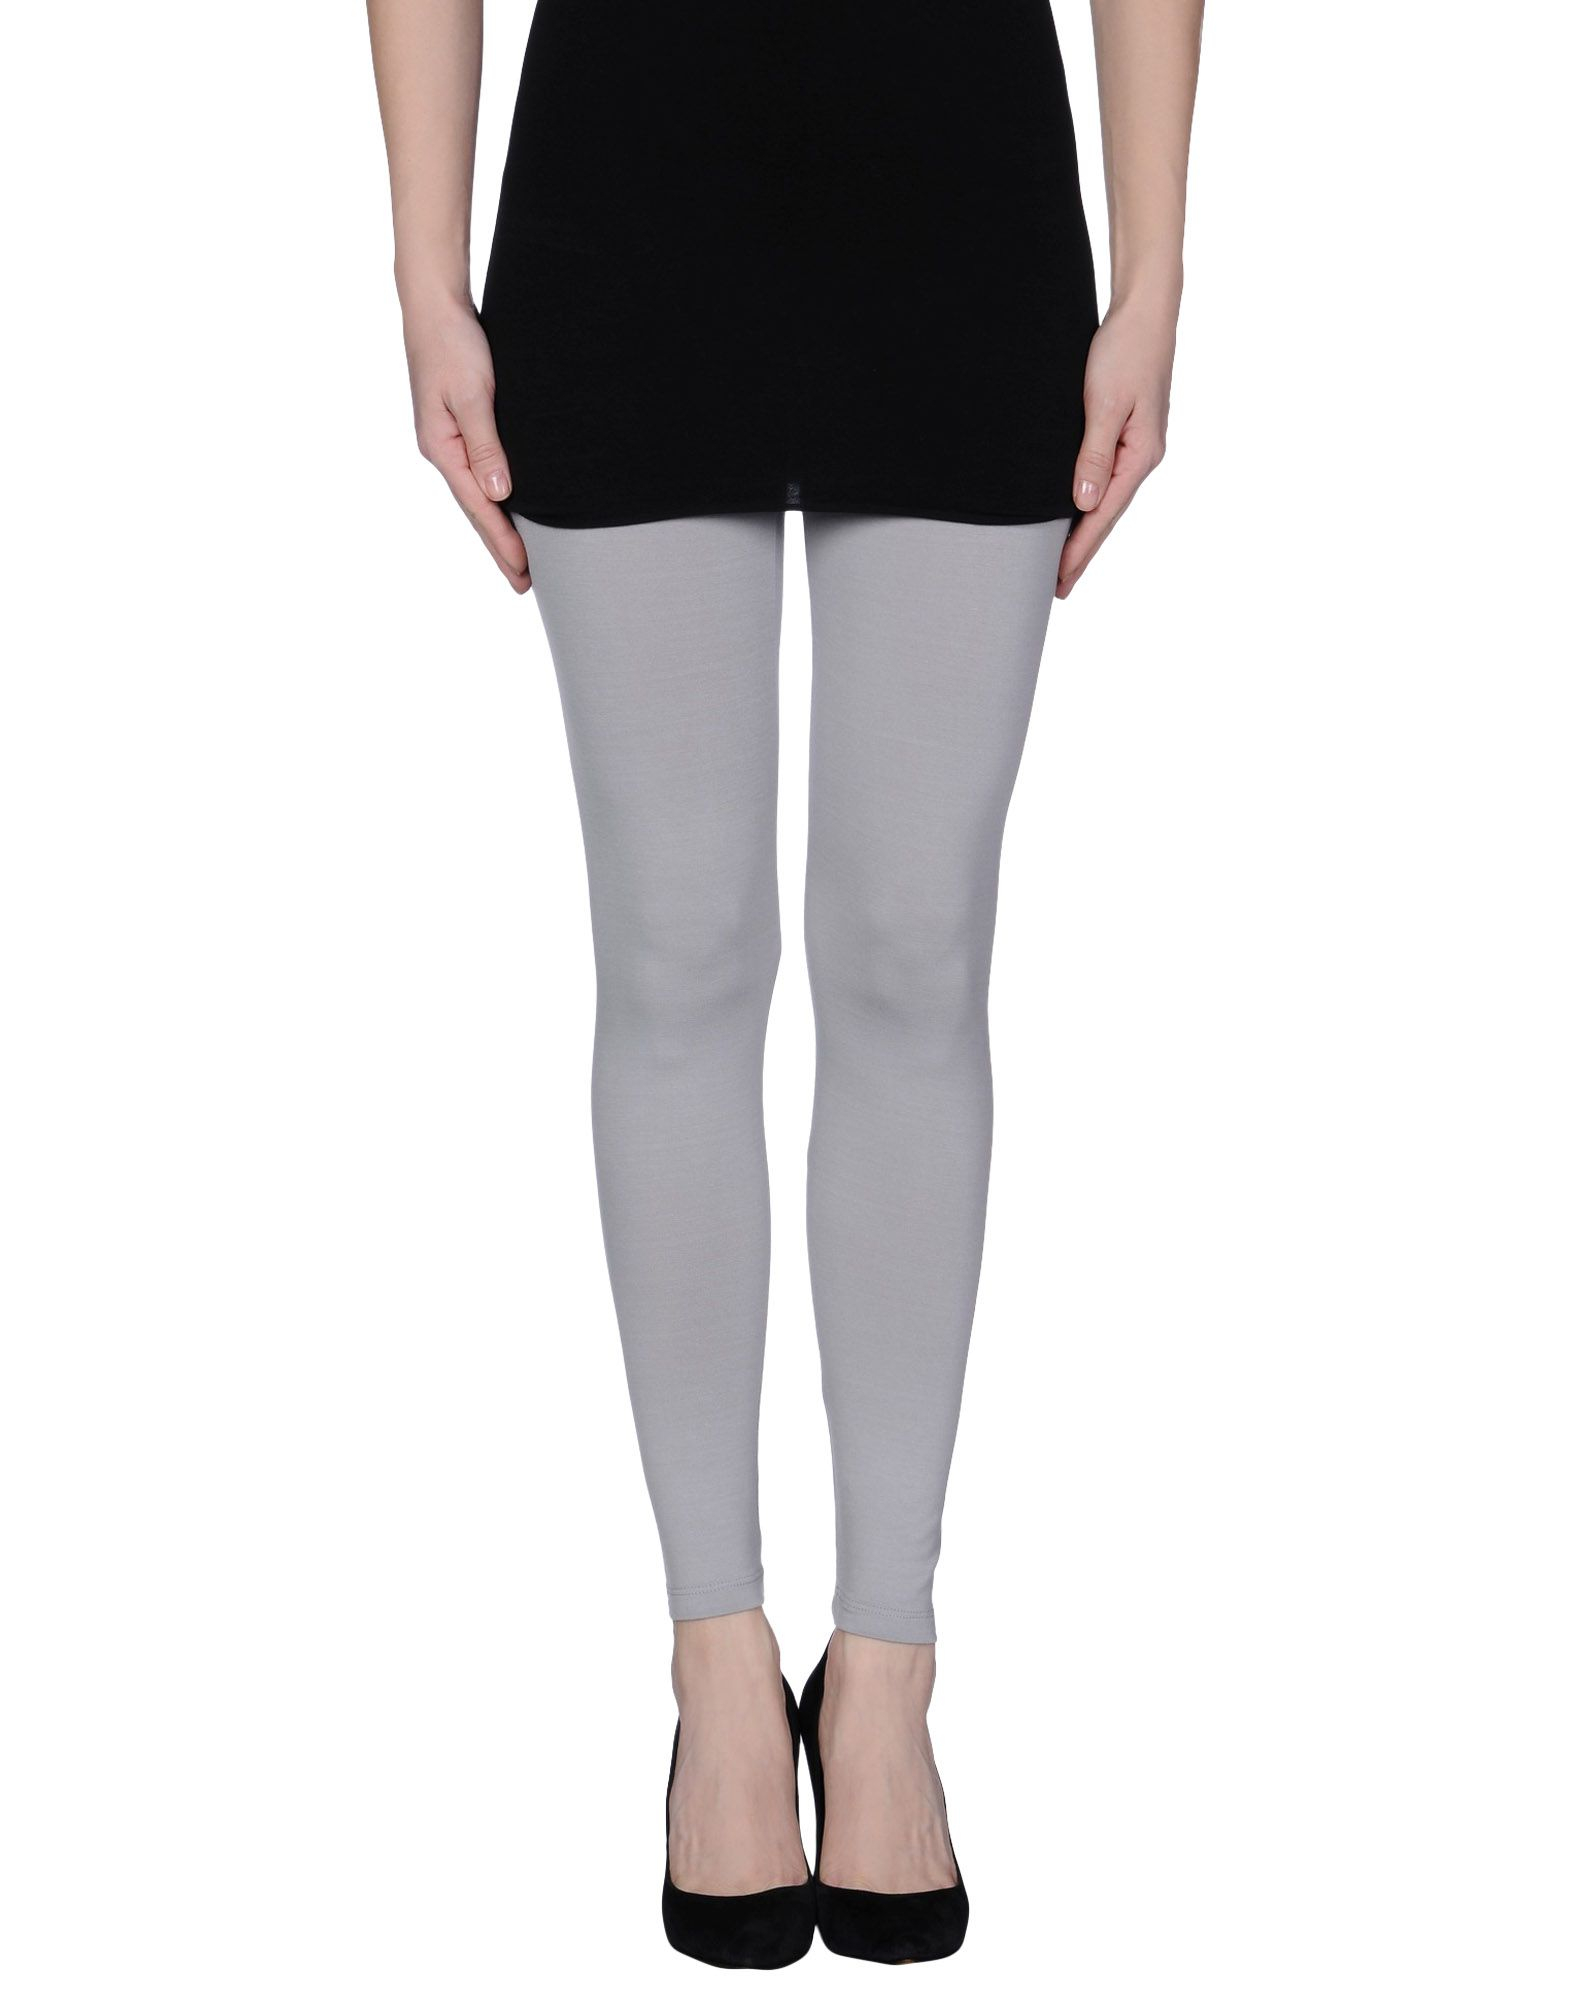 Light grey leggings for women pictures without macy's vintage